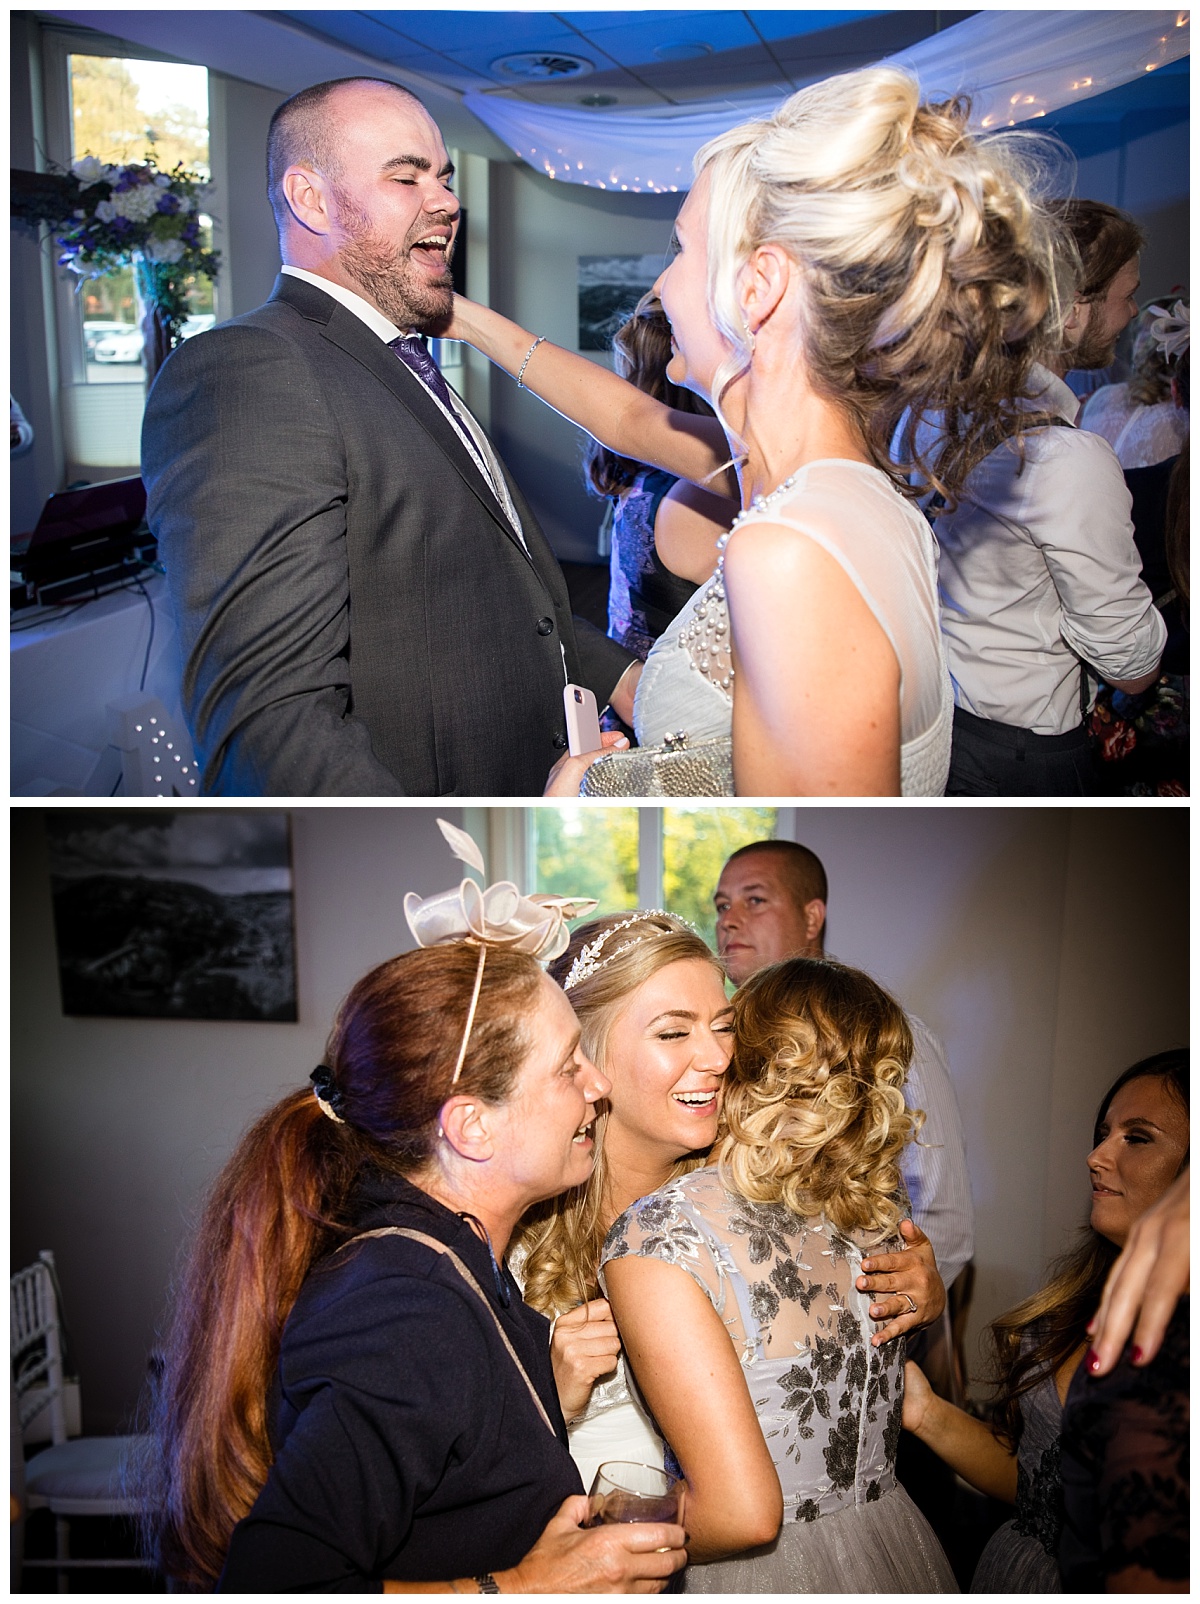 Wedding Photography Manchester - Sam and James's Cheadle House Wedding 79